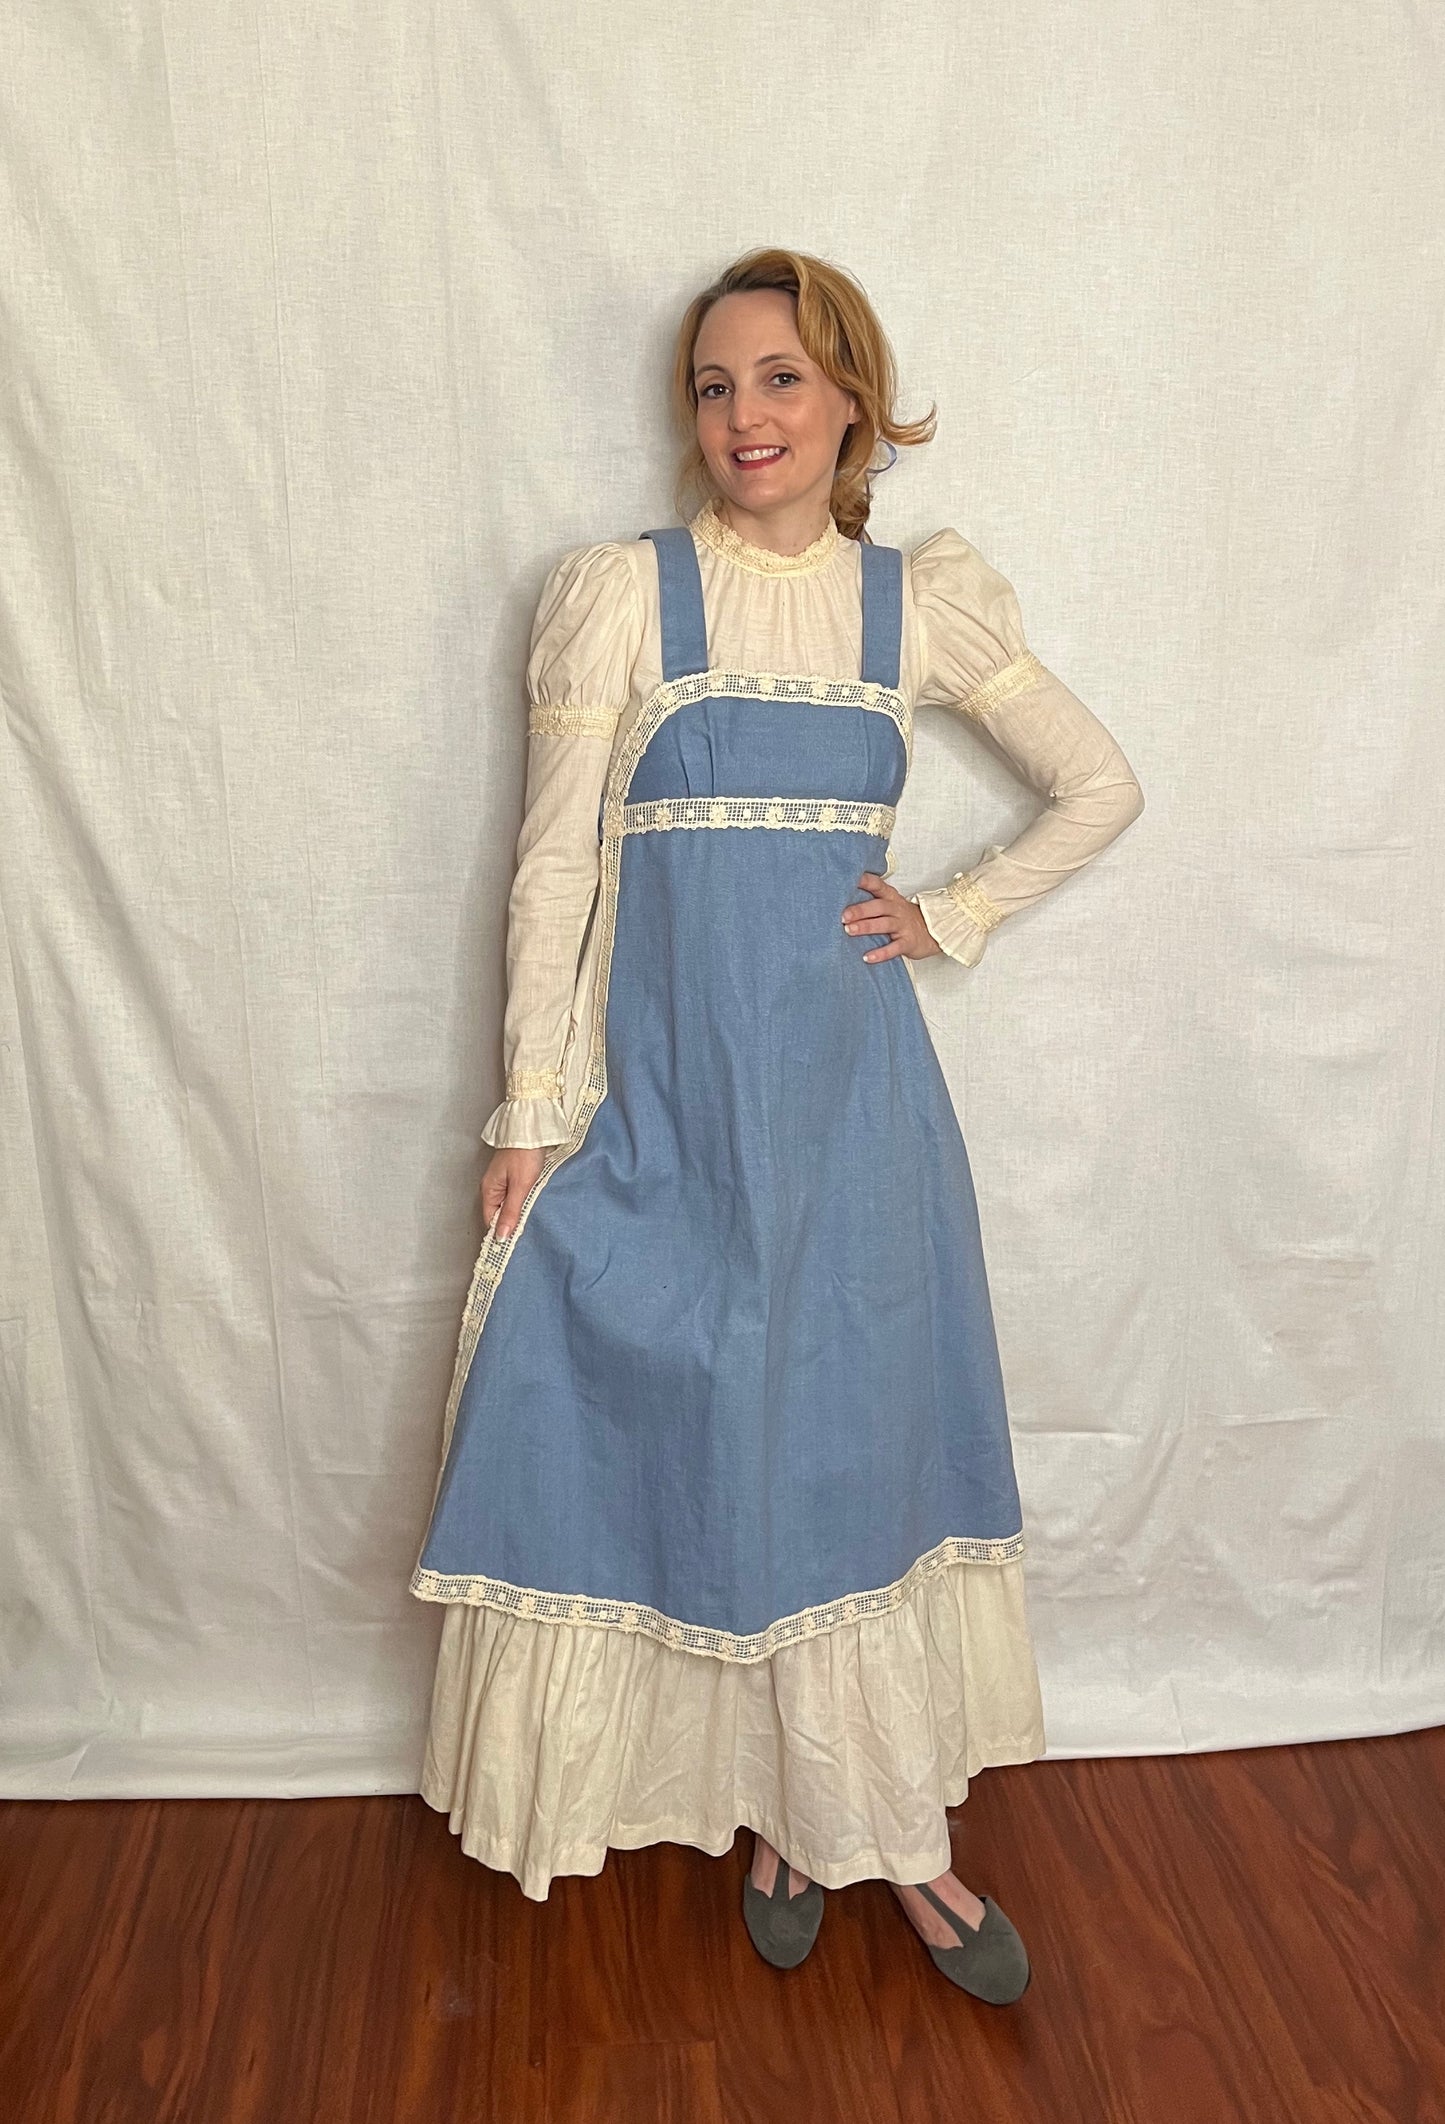 Vintage 1960’s "Gunne Sax of California" Denim Chambray and Cotton Muslin Apron Front Long Sleeve Maxi Dress